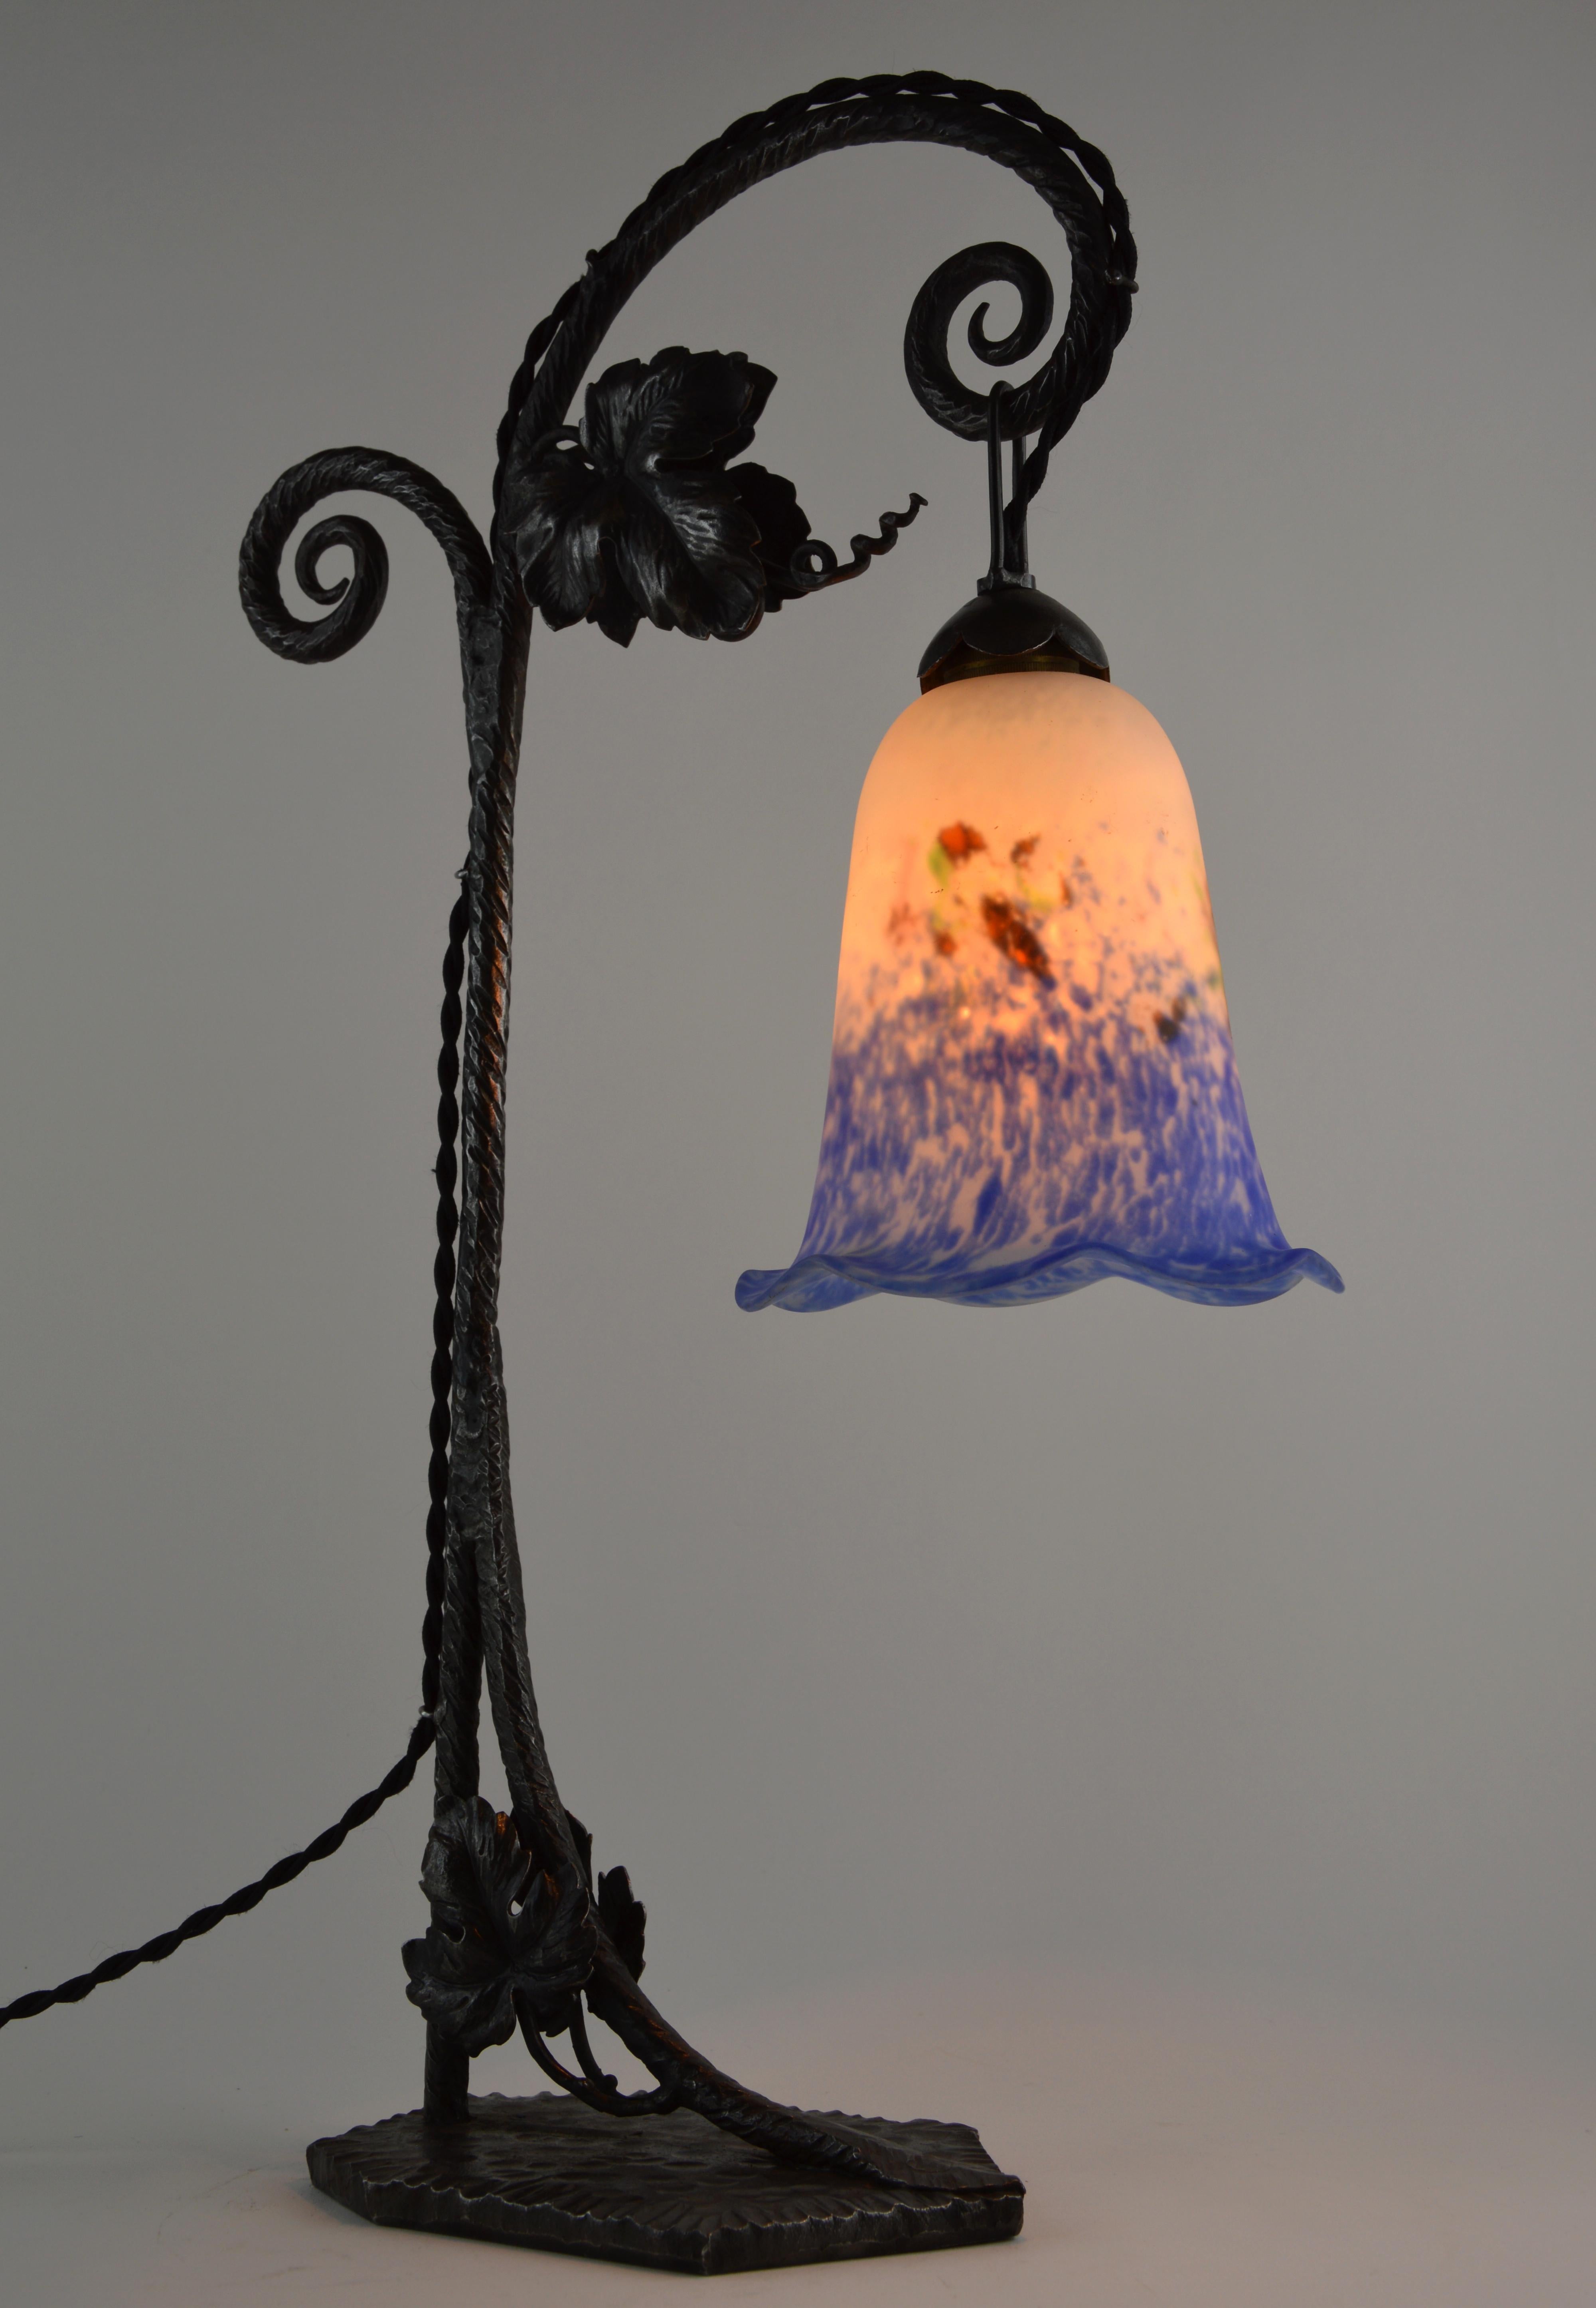 French Art Deco table or desk lamp by Daum (Croismare, Nancy), France, late 1920s. Blown double glass shade hung at its wrought iron base. Colors: blue, white, ochre, green and pink. Five colors for this beautiful shade. Enameled signature 